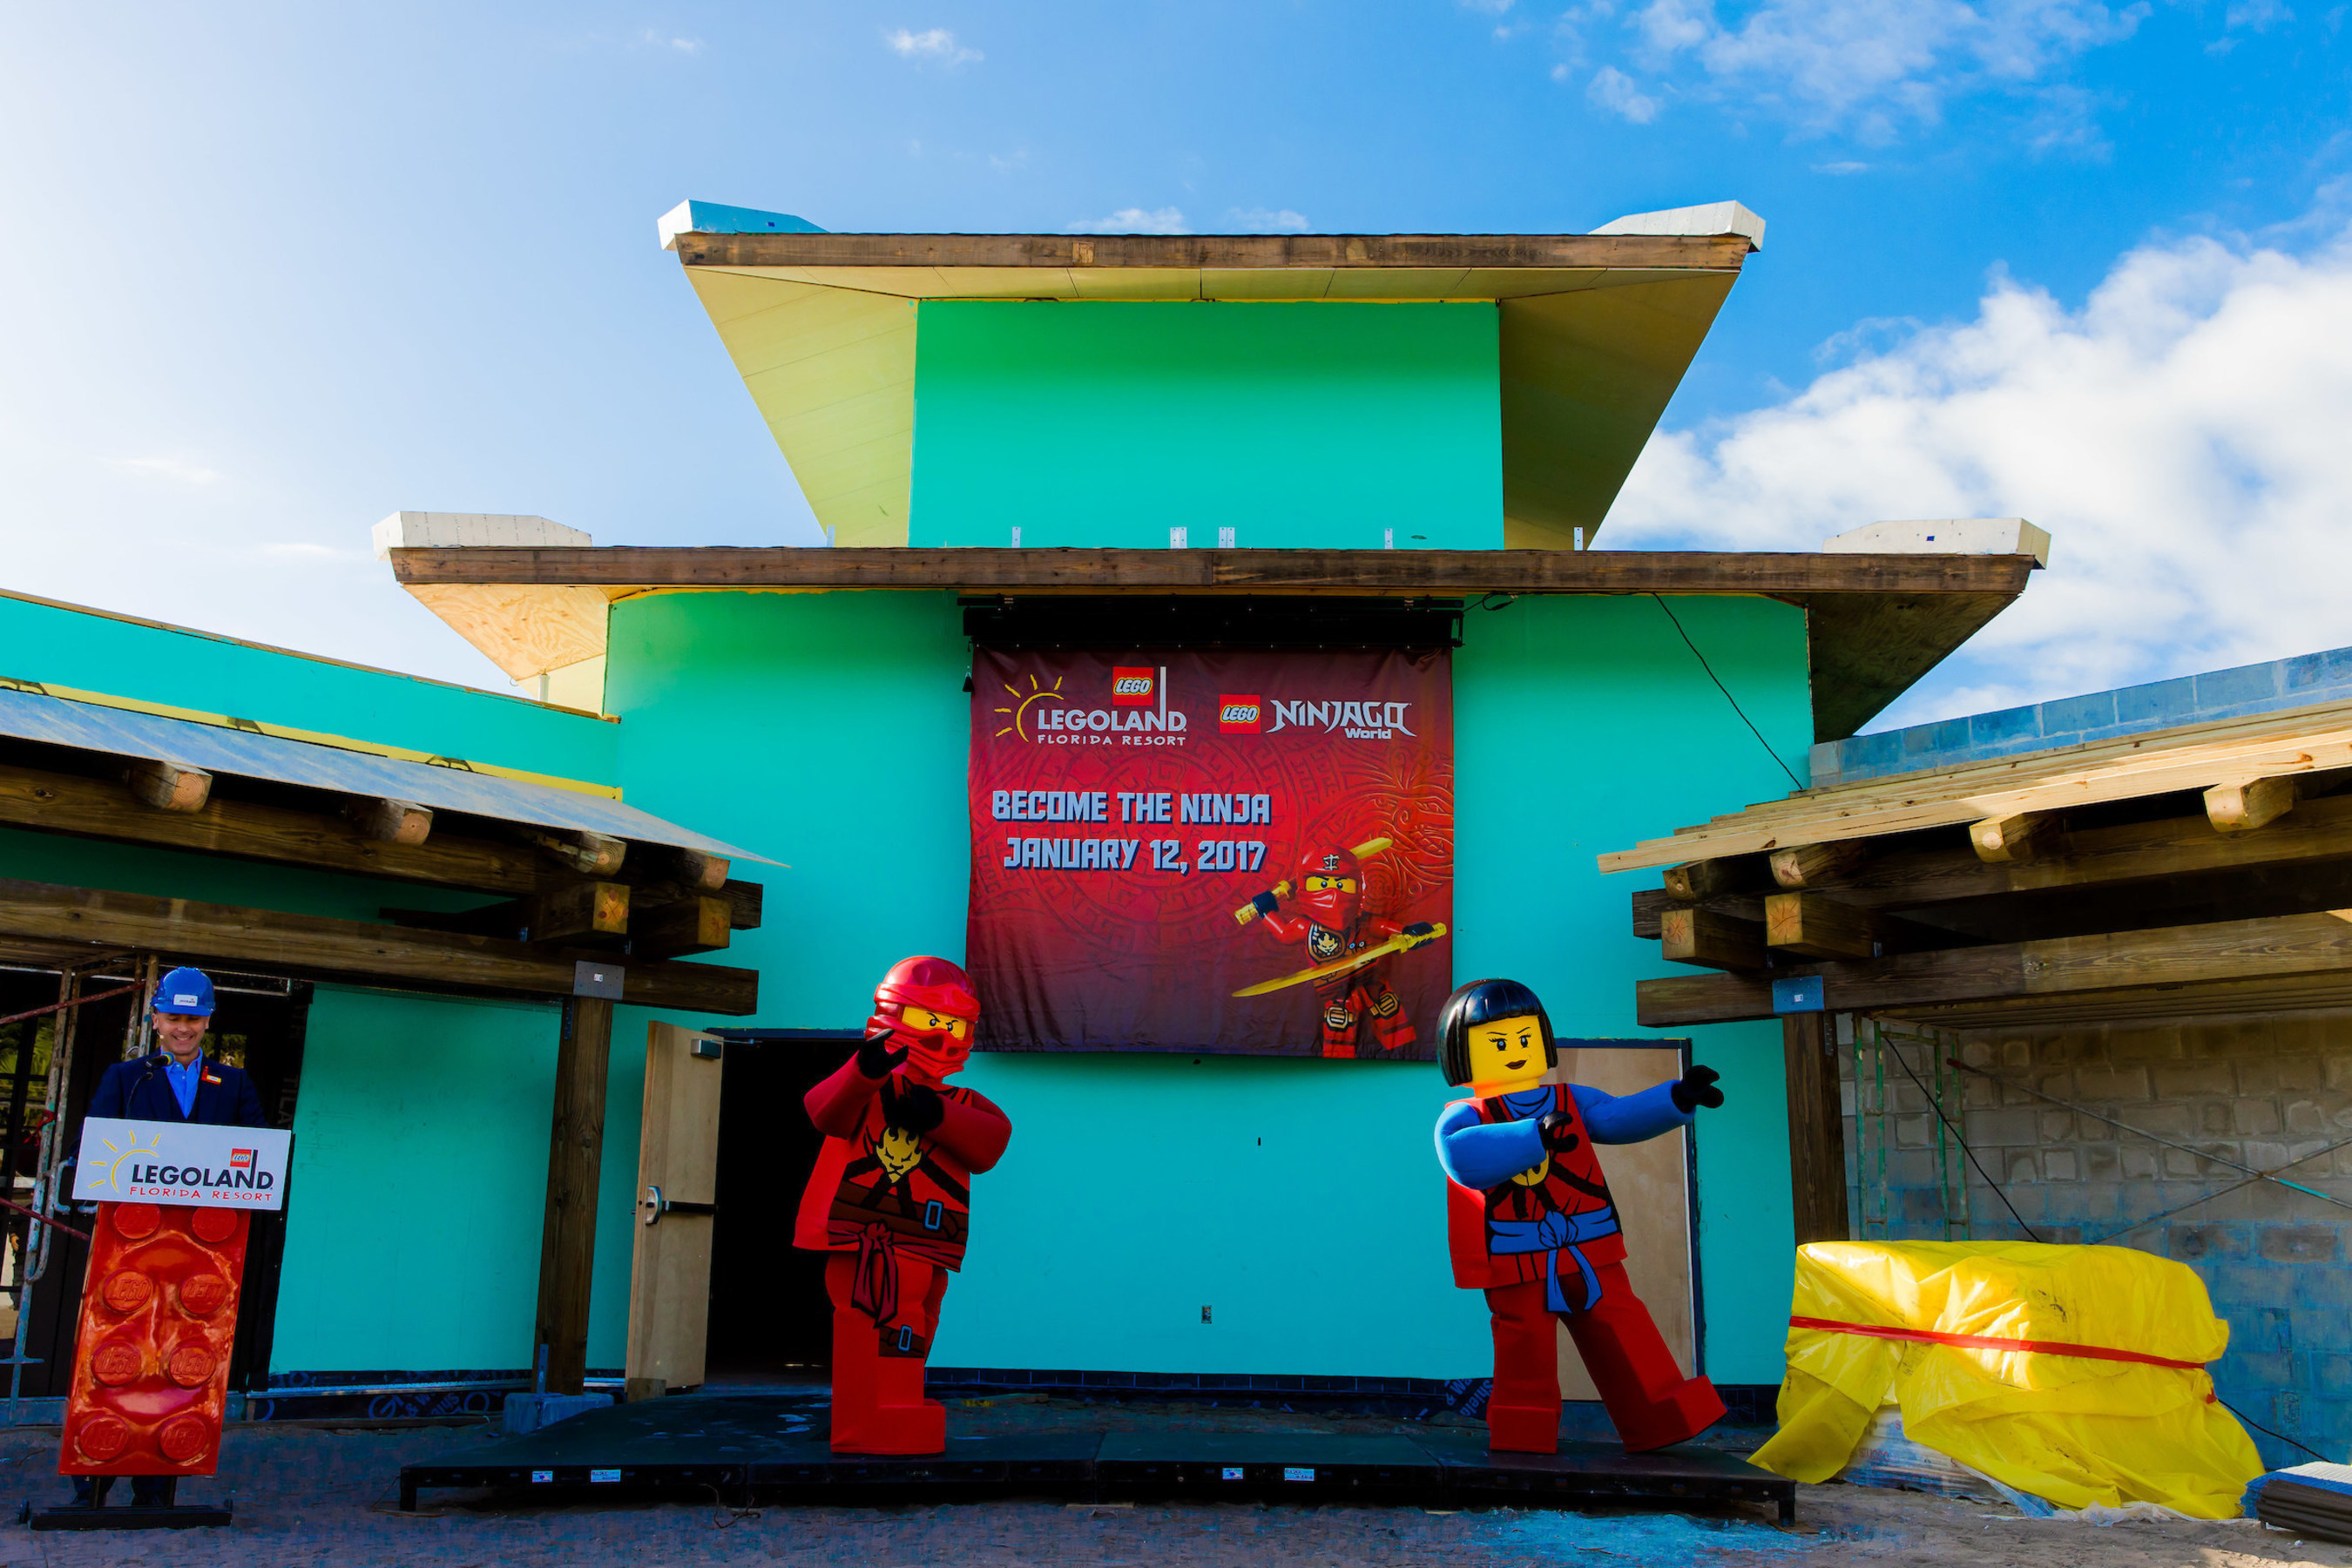 Brother-and-sister ninjas Kai, left, and Nya, helped reveal the grand opening date for LEGO NINJAGO World with Adrian Jones, general manager of LEGOLAND Florida Resort in Winter Haven, Fla.